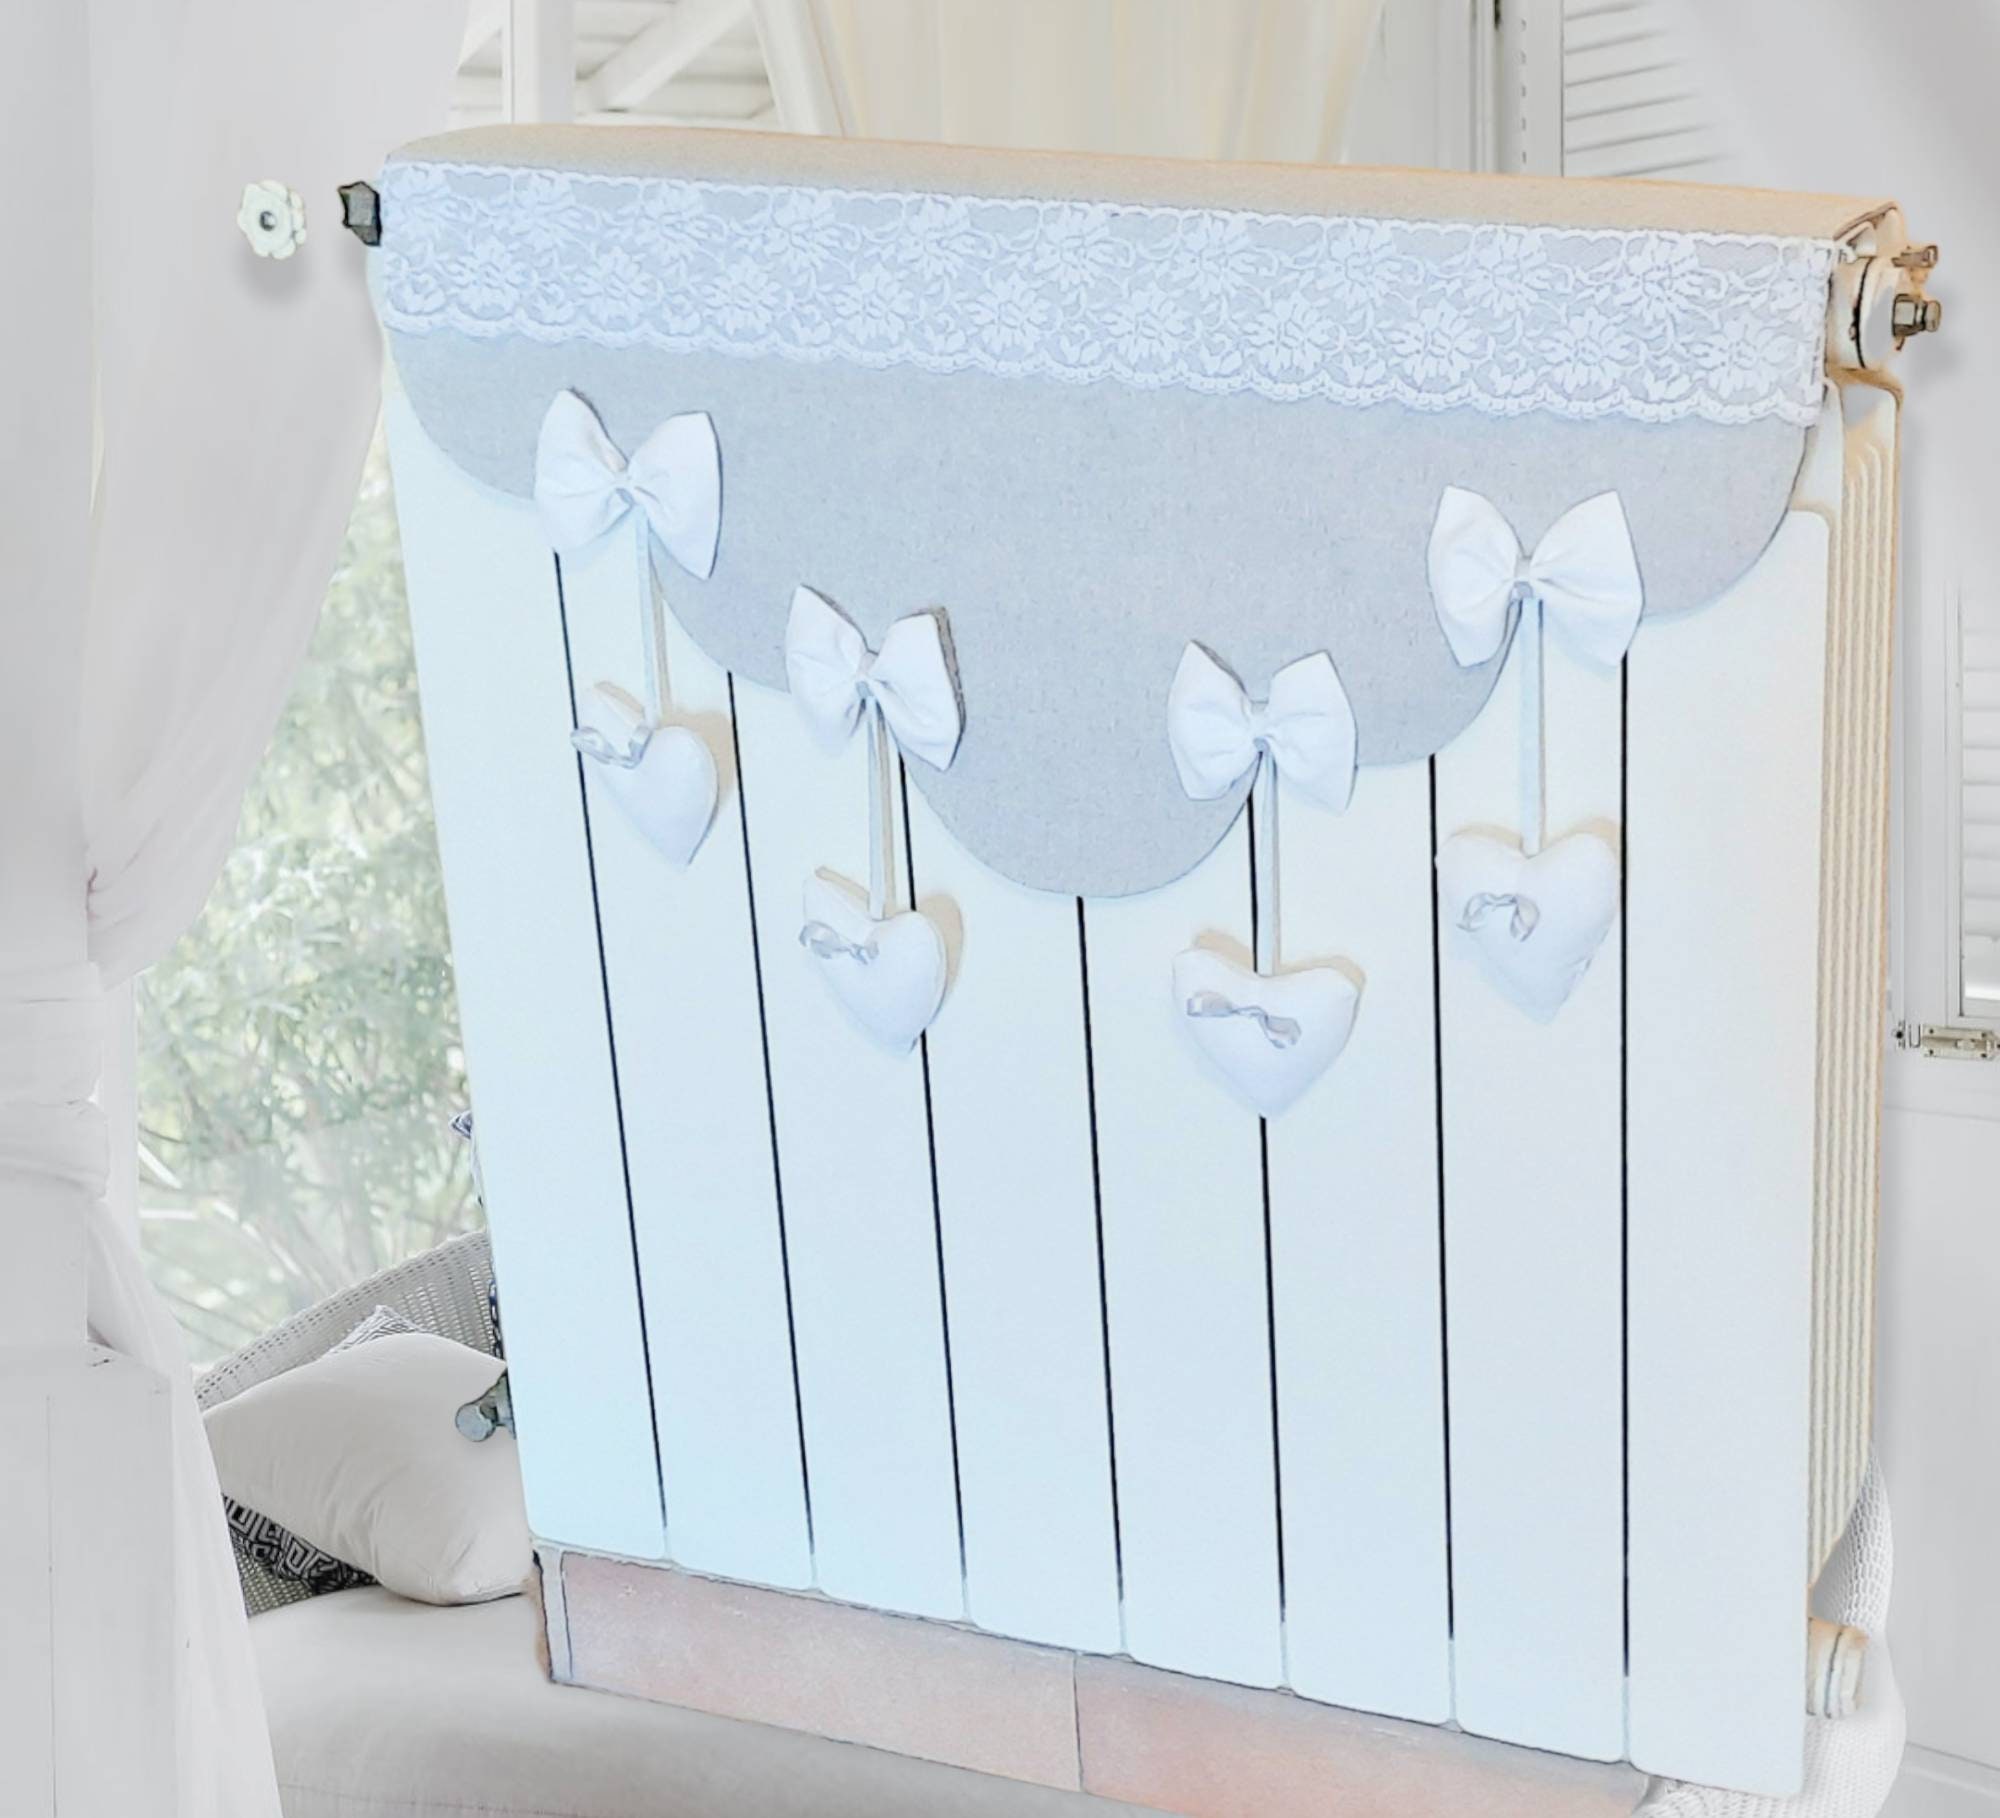 Shabby Country Chic Radiator Cover elisea Model, Symmetrical Waves in  Scale, Bows Holding Hearts Suspended From Satin Ribbons 